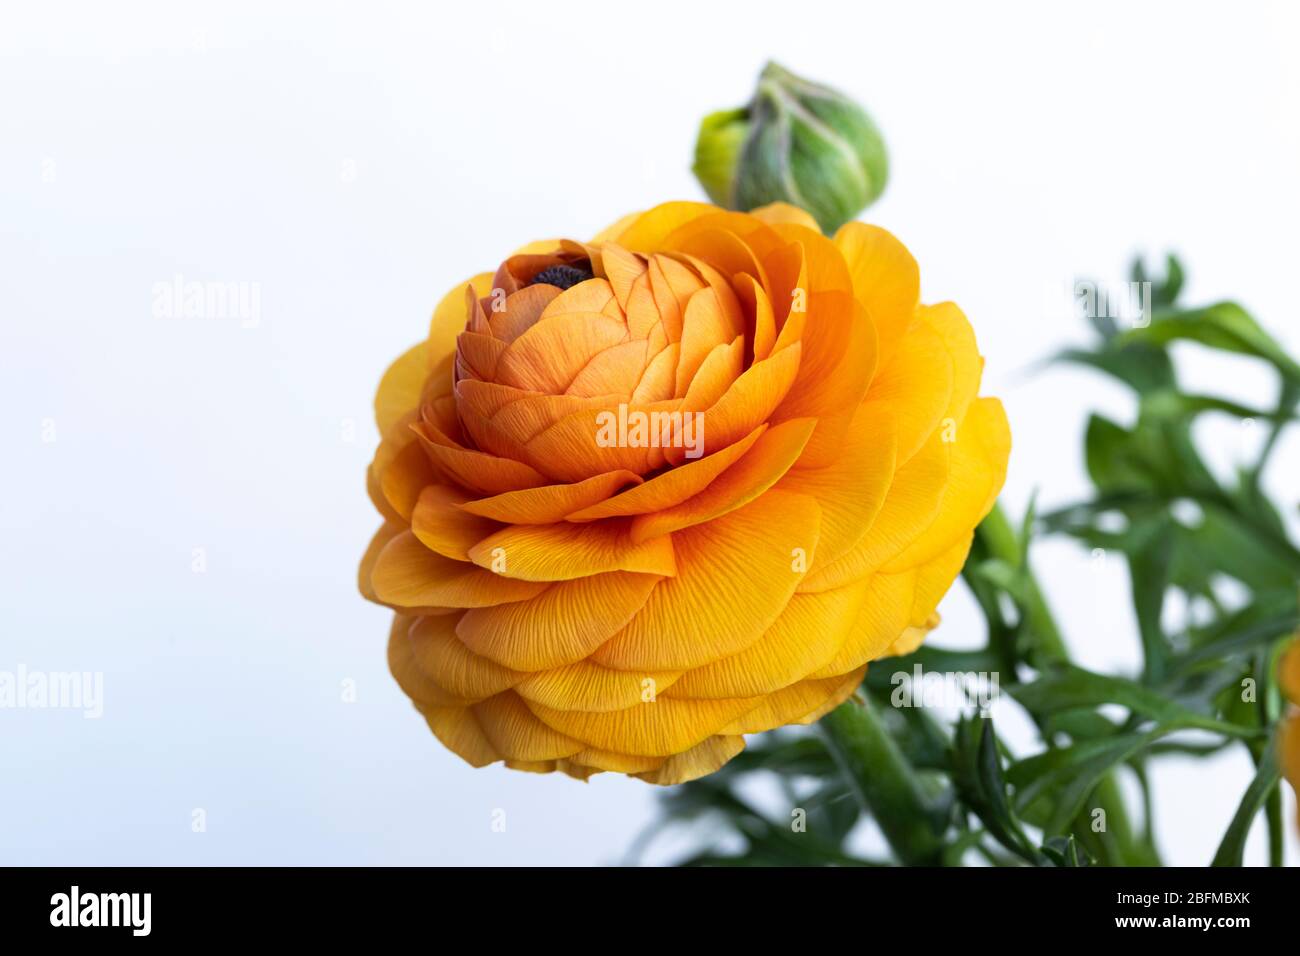 Close up of a golden orange Ranunculus bloom and leaves against a white backround, UK Stock Photo